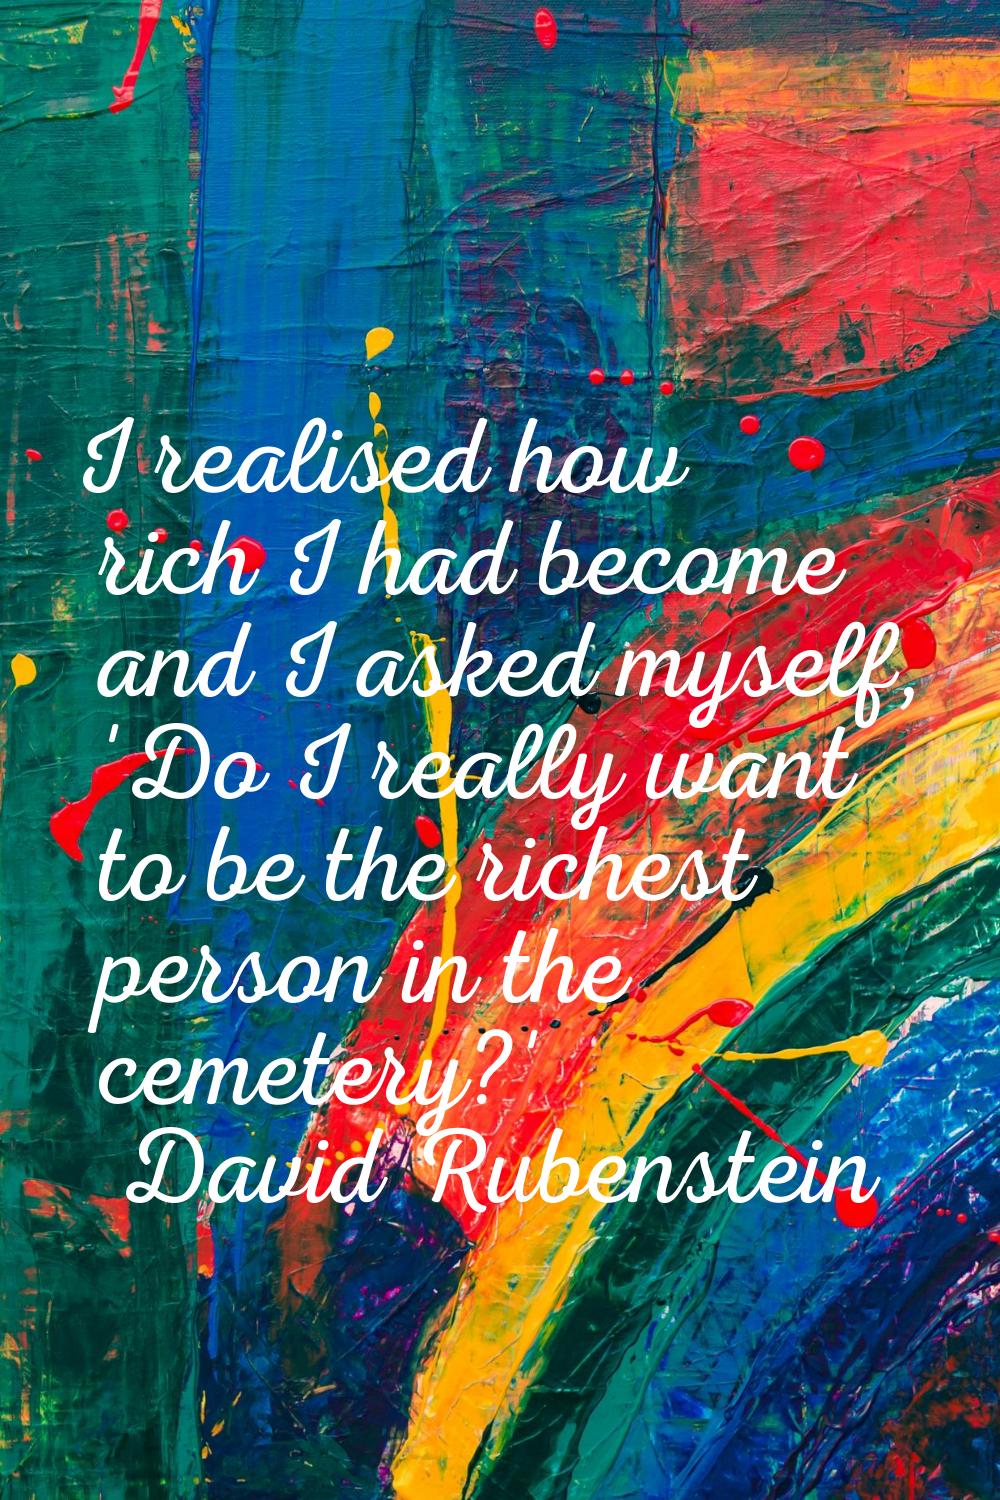 I realised how rich I had become and I asked myself, 'Do I really want to be the richest person in 